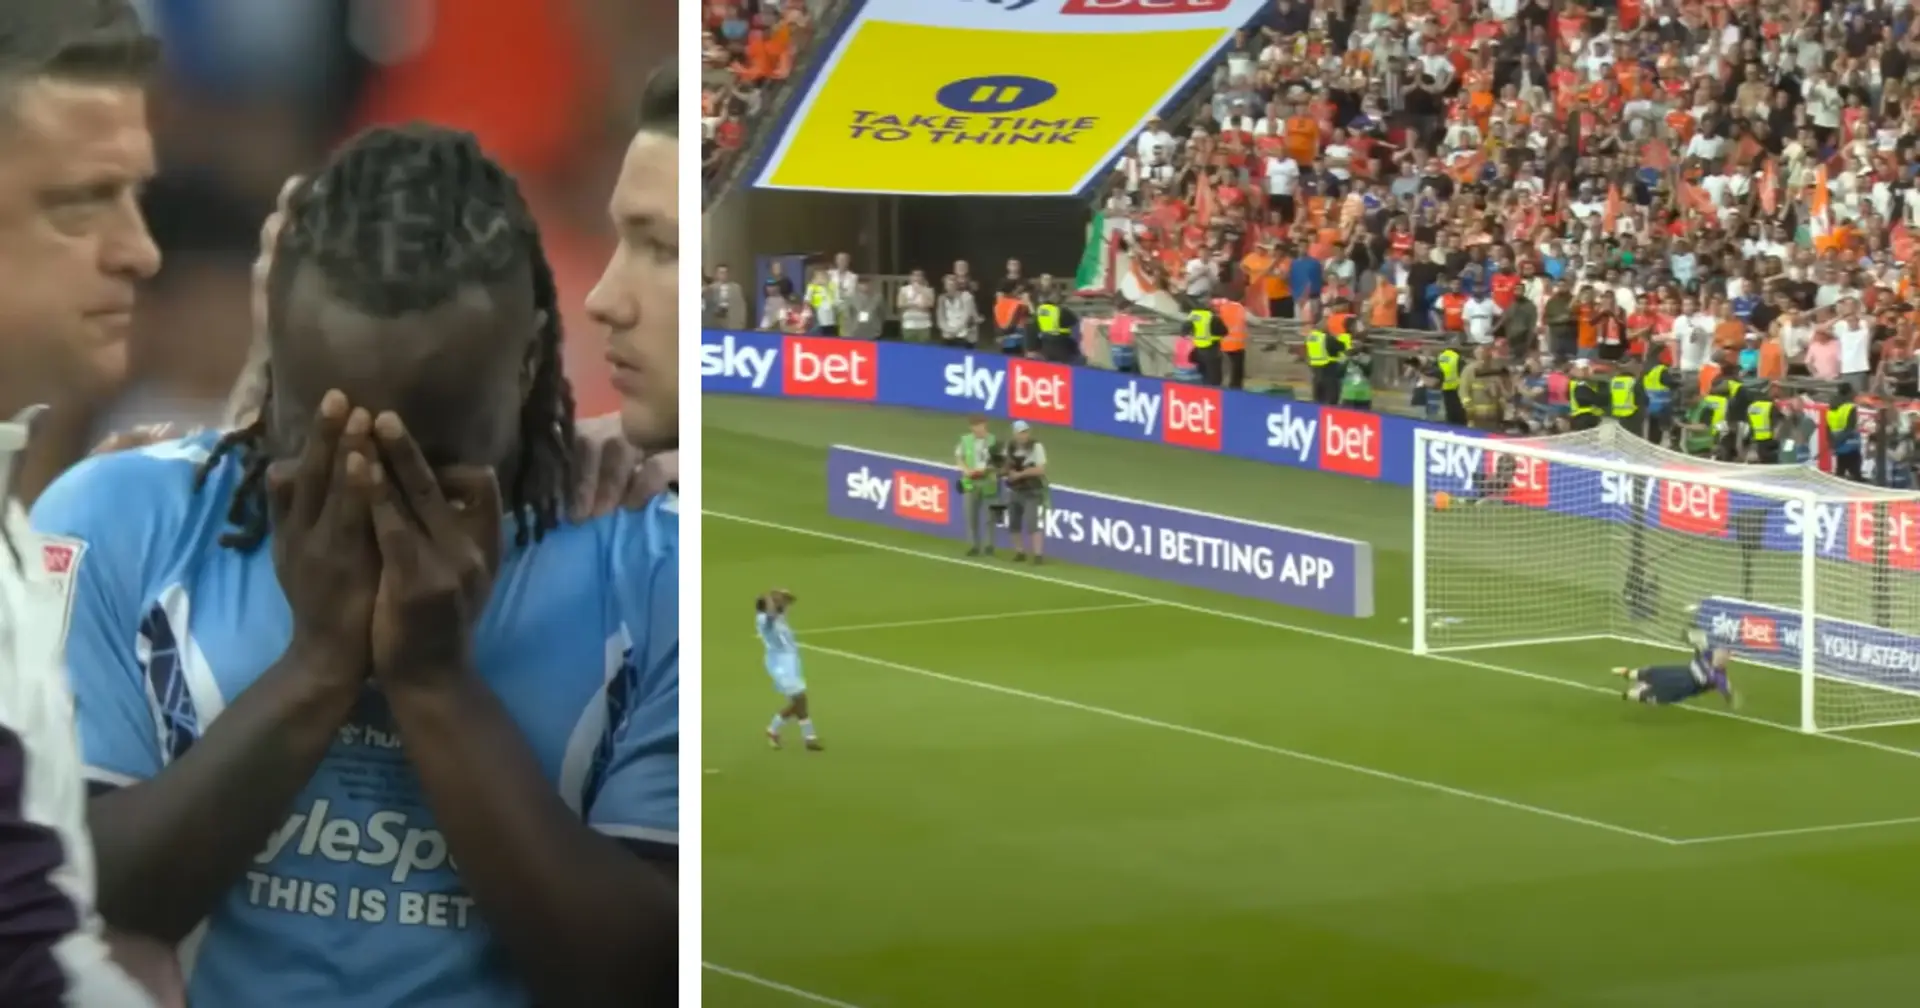 Fankaty Dabo victim of racist abuse after missing penalty in world's richest game of football